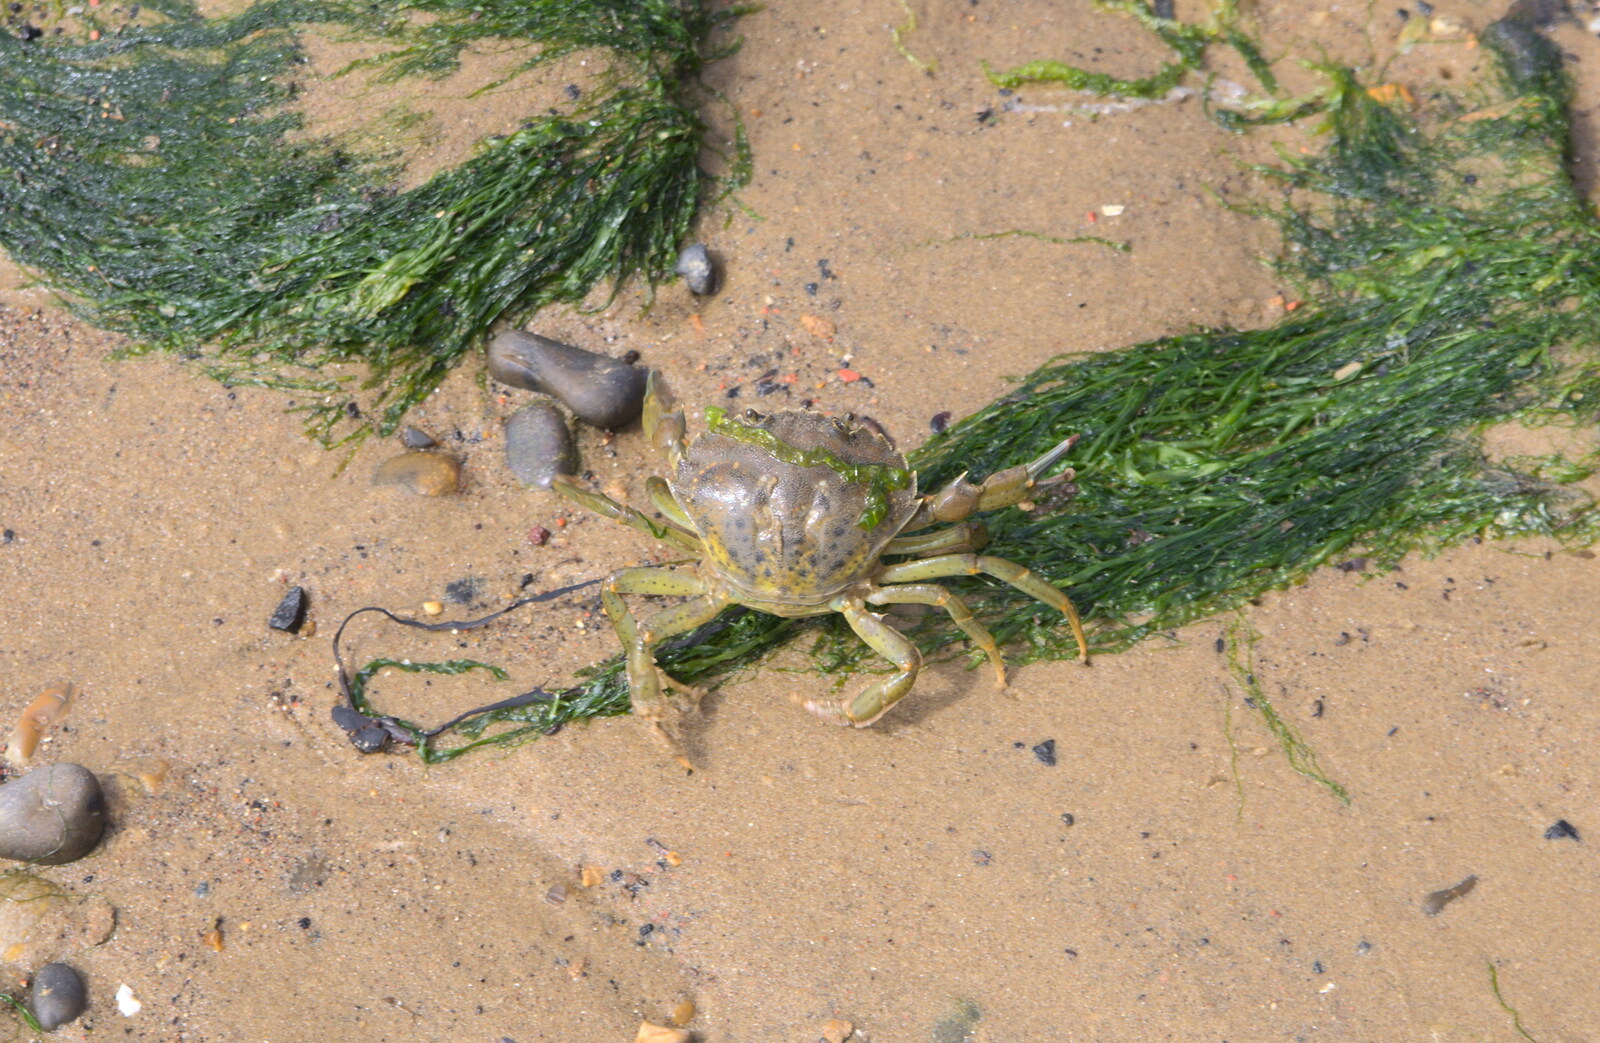 The crabs are let go, and scuttle into the river from The Danger of Trees: A Camping (Mis)adventure - Southwold, Suffolk - 3rd August 2015